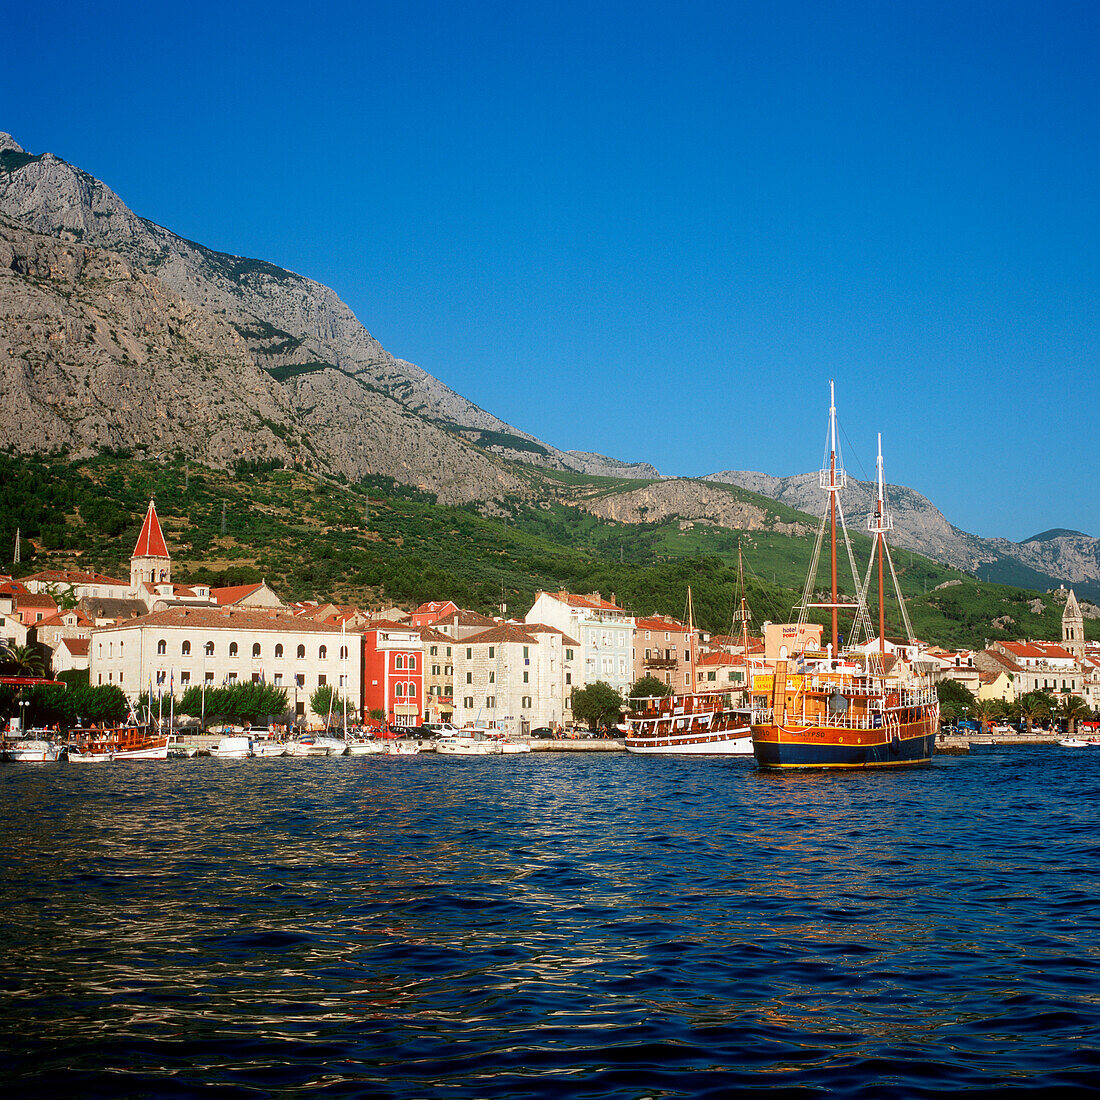 makarska, dalmatia, croatia, adriatic sea, vacation, travel, tourism, tourists, town right on the waterfront, water, boats, sightseeing, range of mountain in the back, view from the waterside, golden light